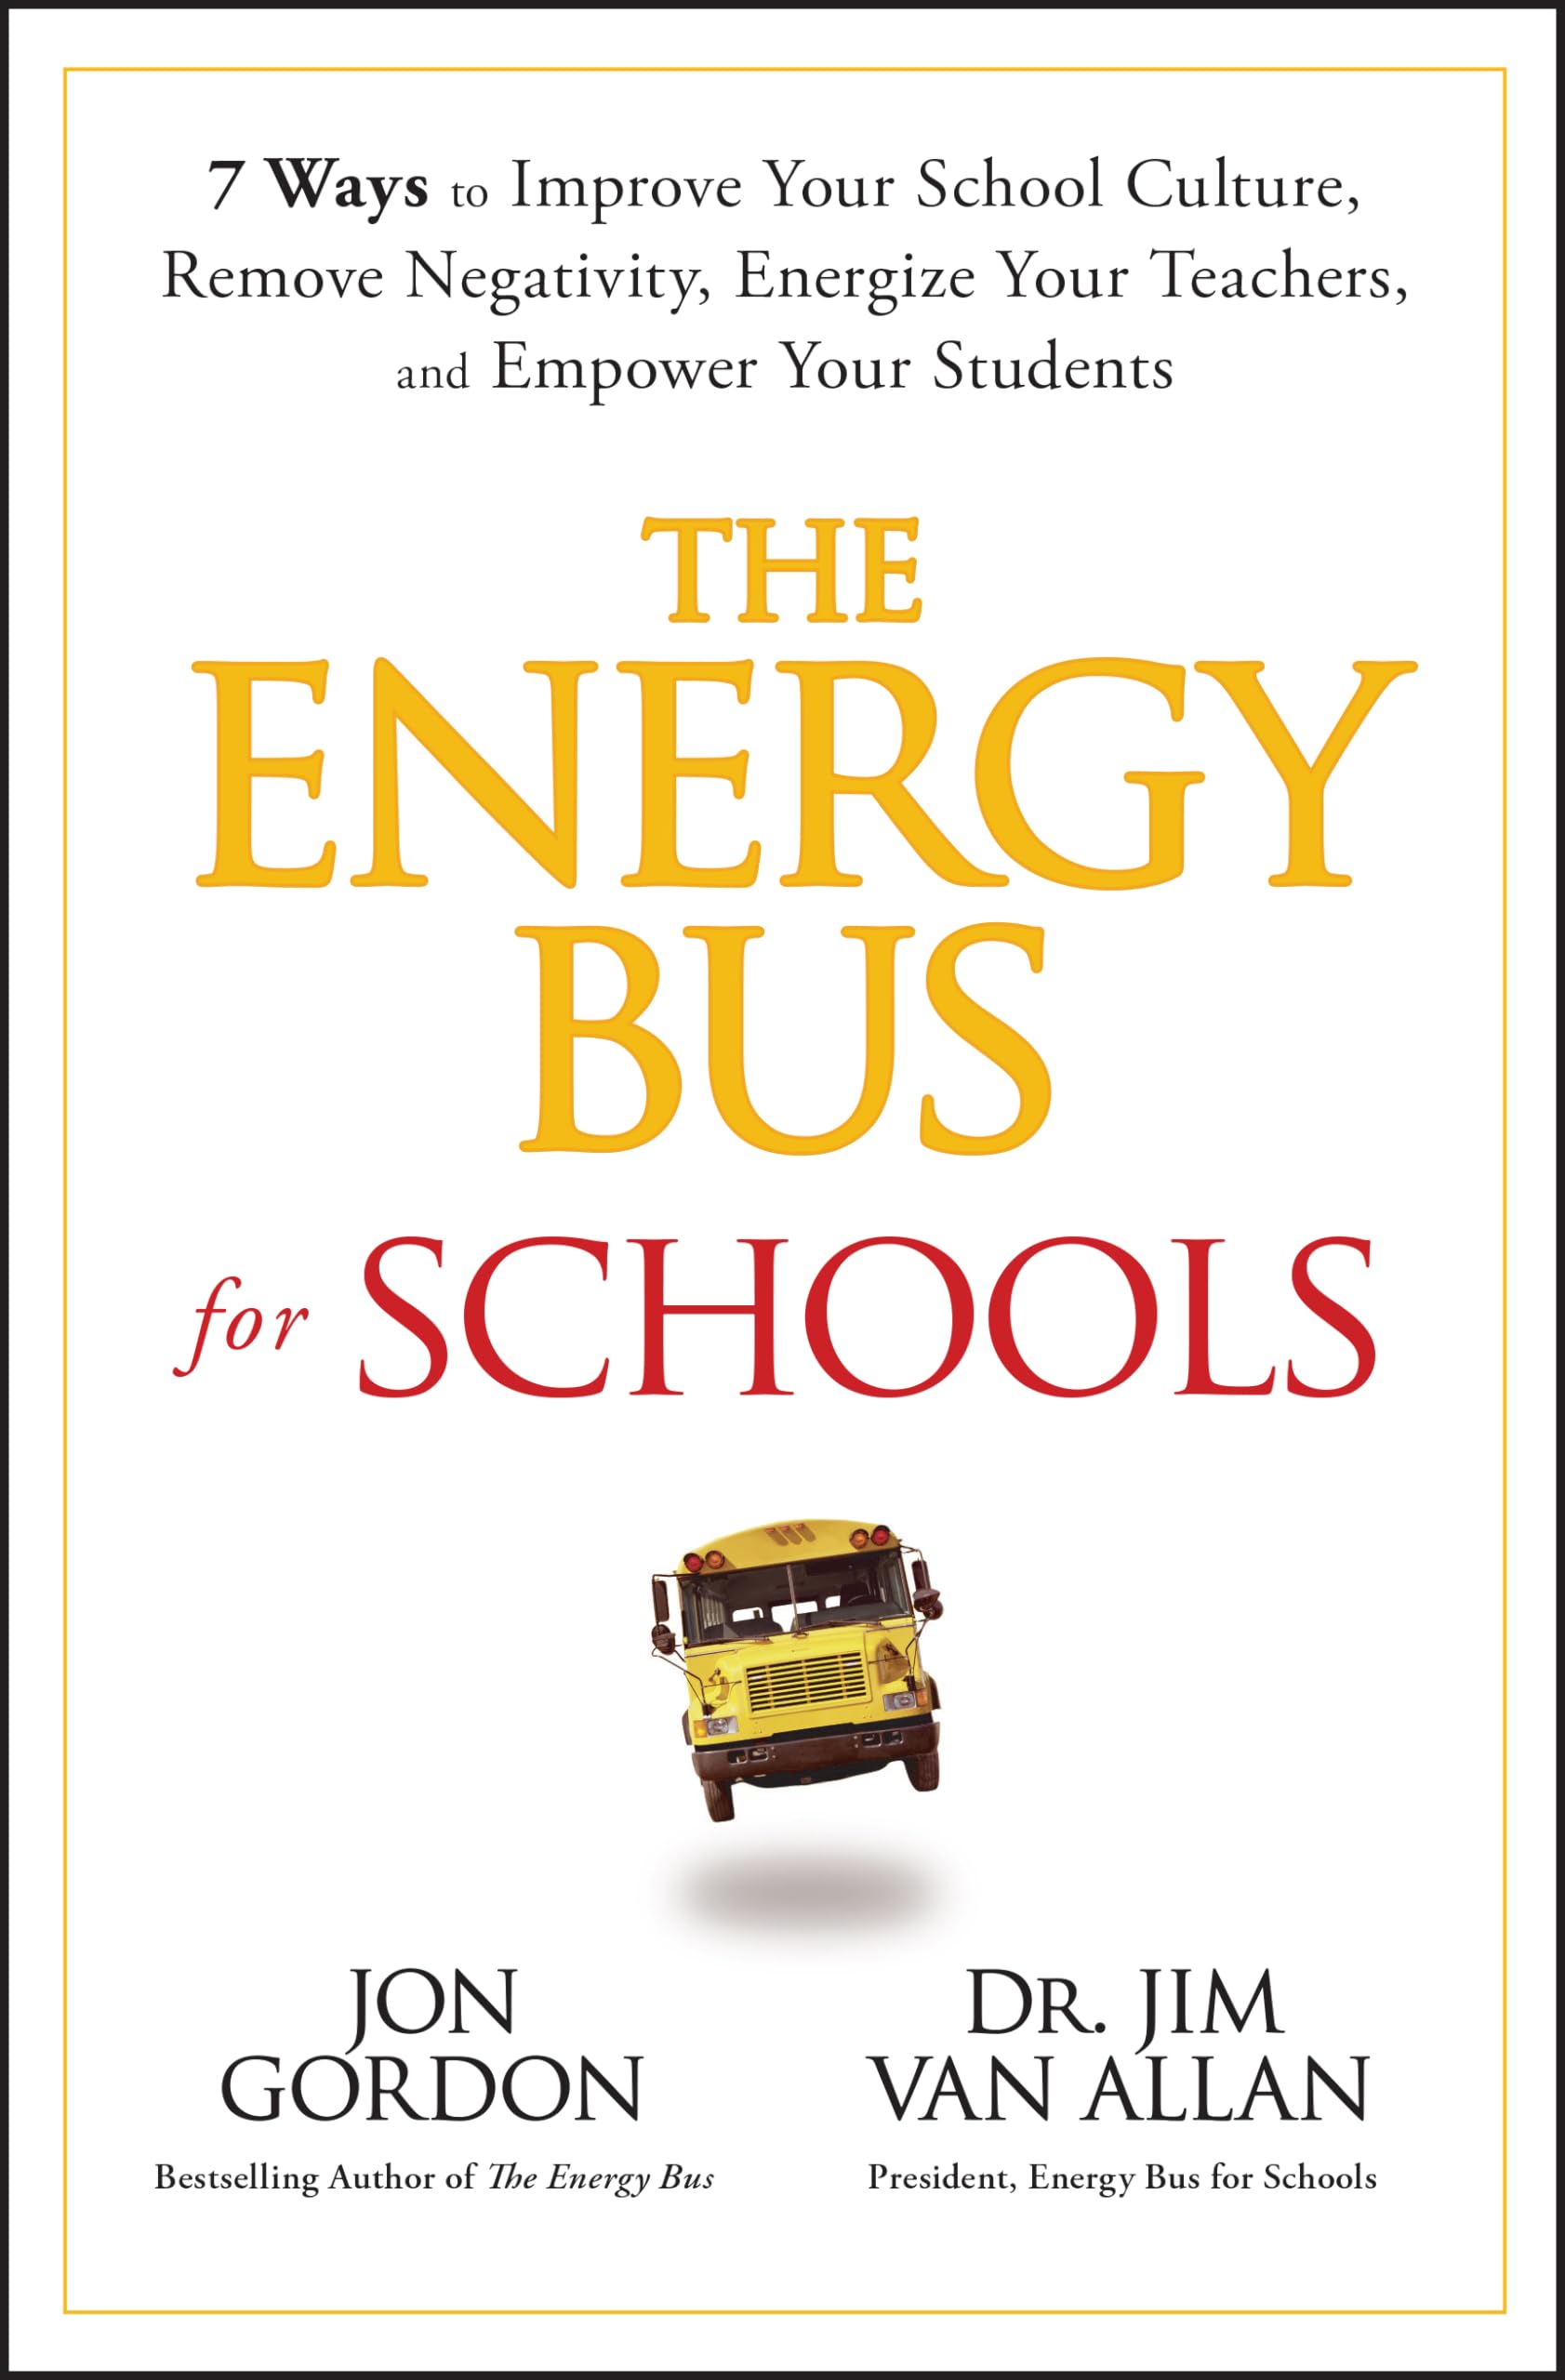 The Energy Bus for Schools: 7 Ways to Improve your School Culture, Remove Negativity, Energize Your Teachers, and Empower Your Students (Jon Gordon)